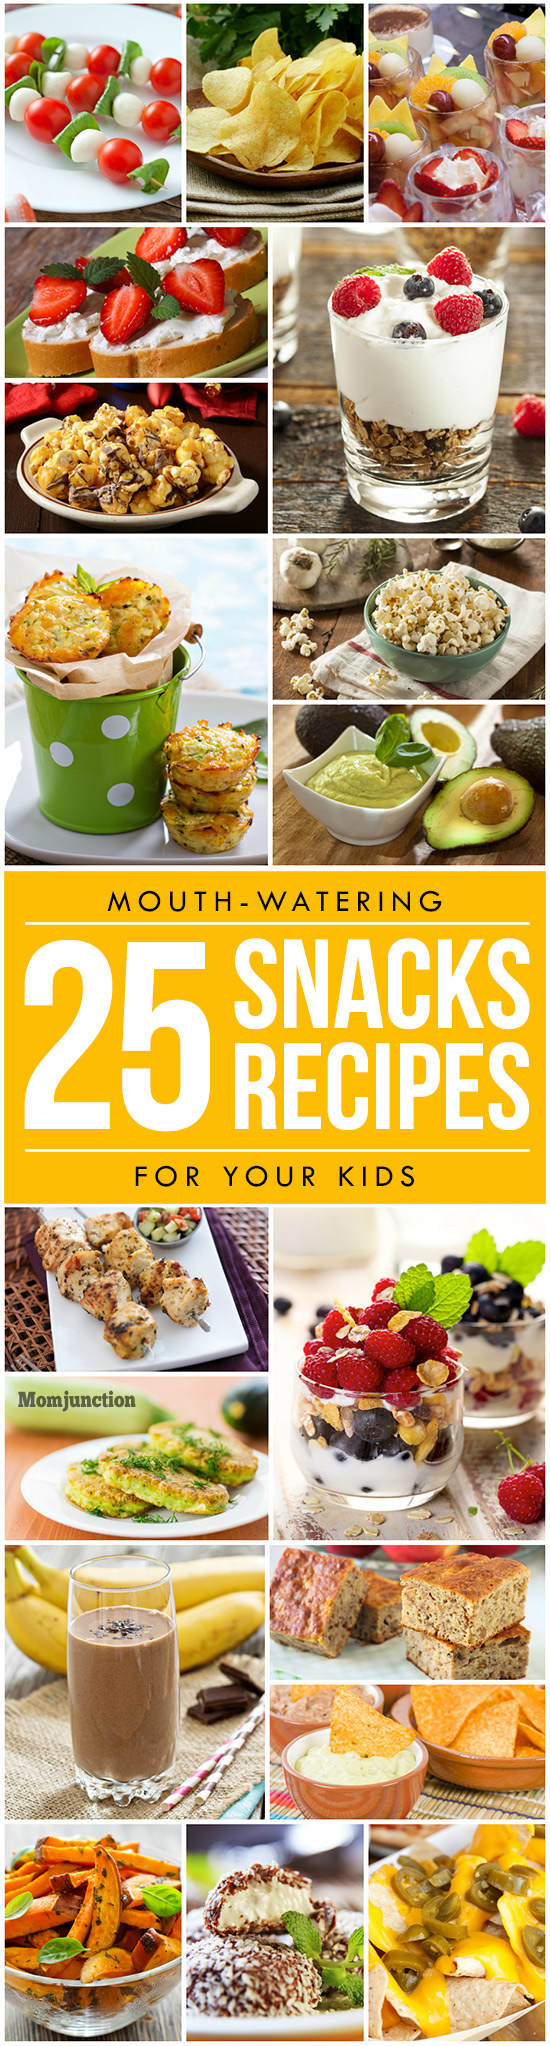 25 Simple & Healthy Snacks Recipes For Kids